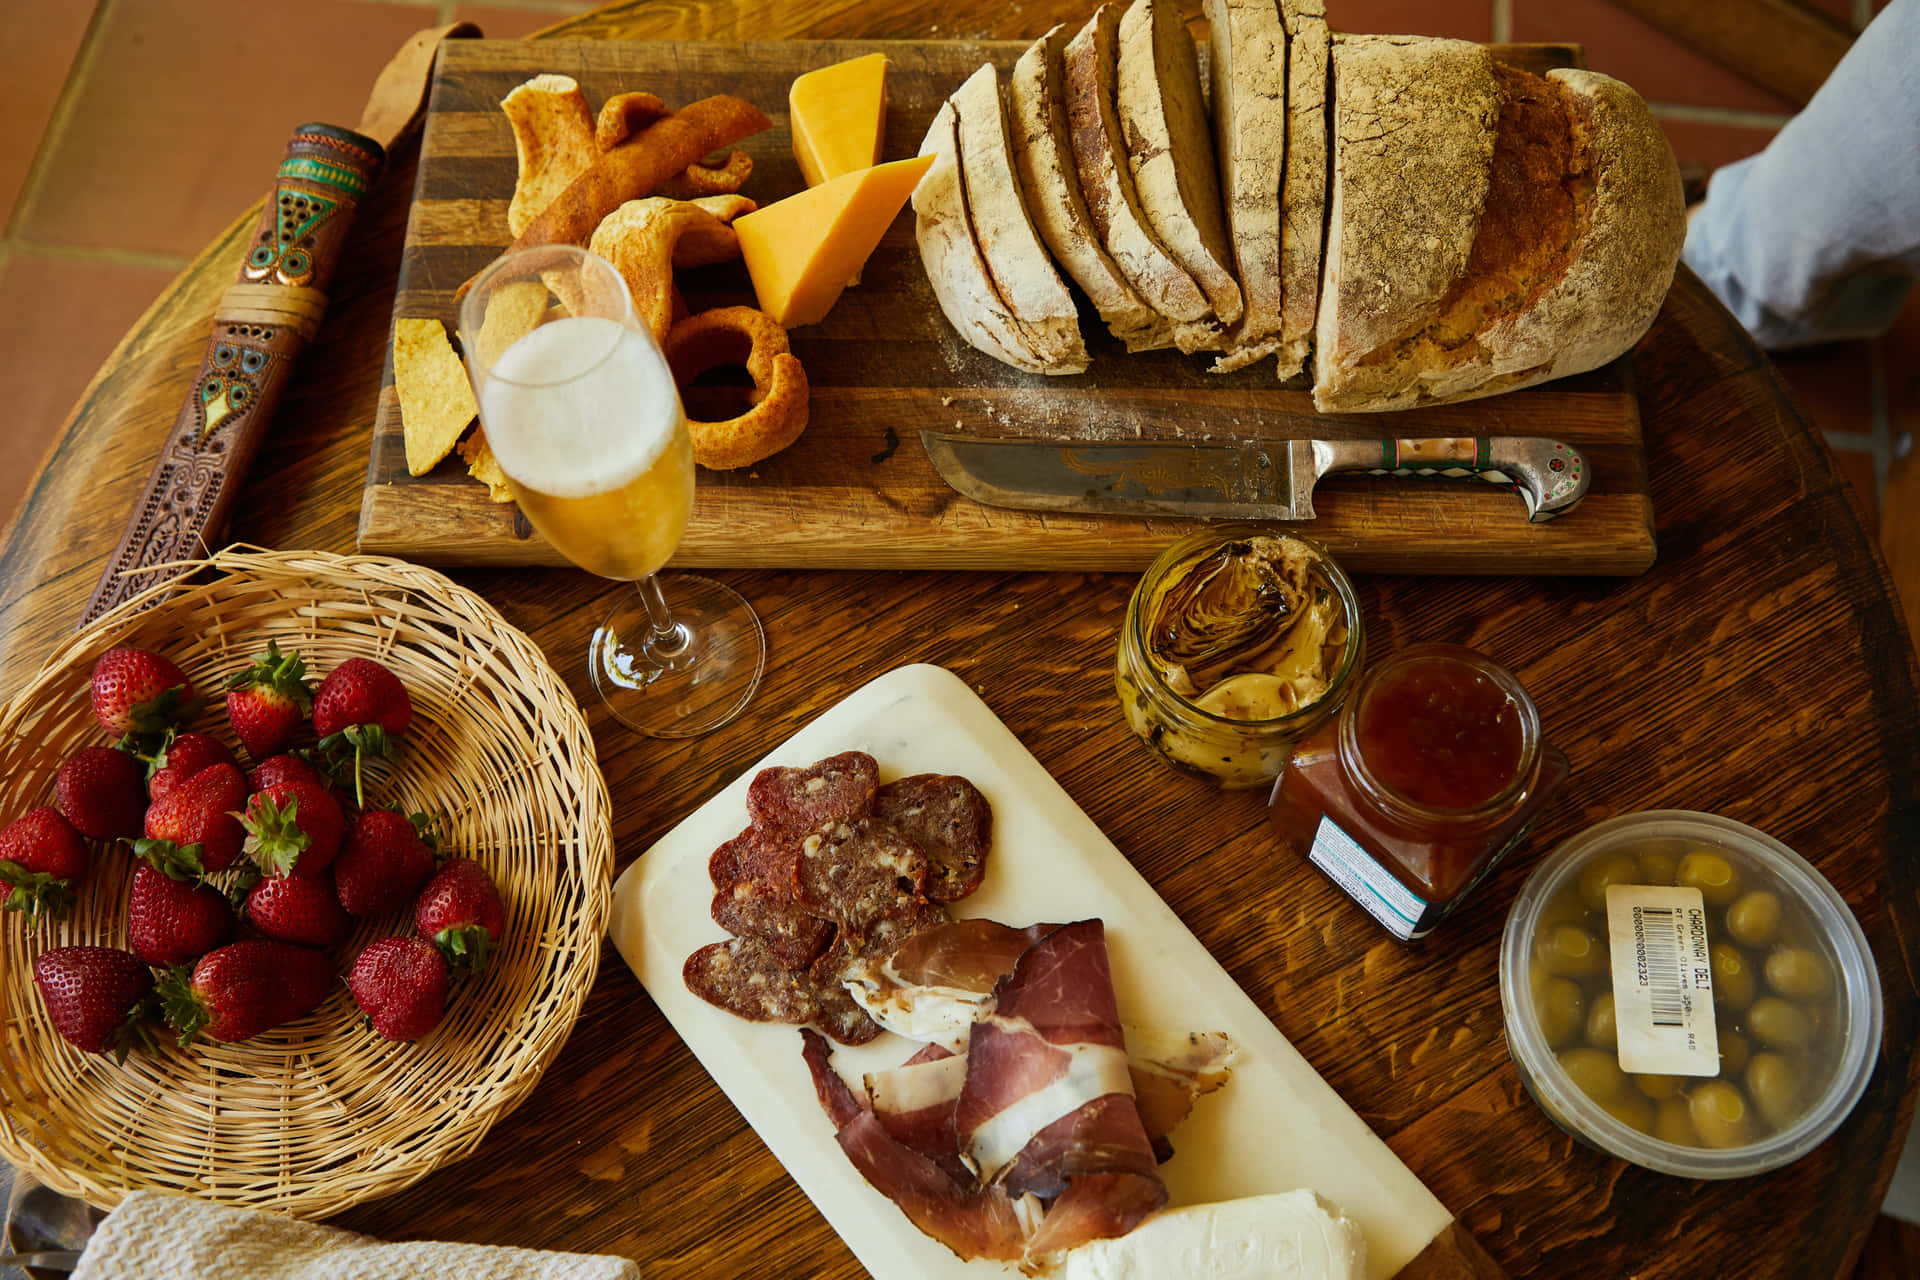 Cheese platter with various types of cheese and fresh grapes